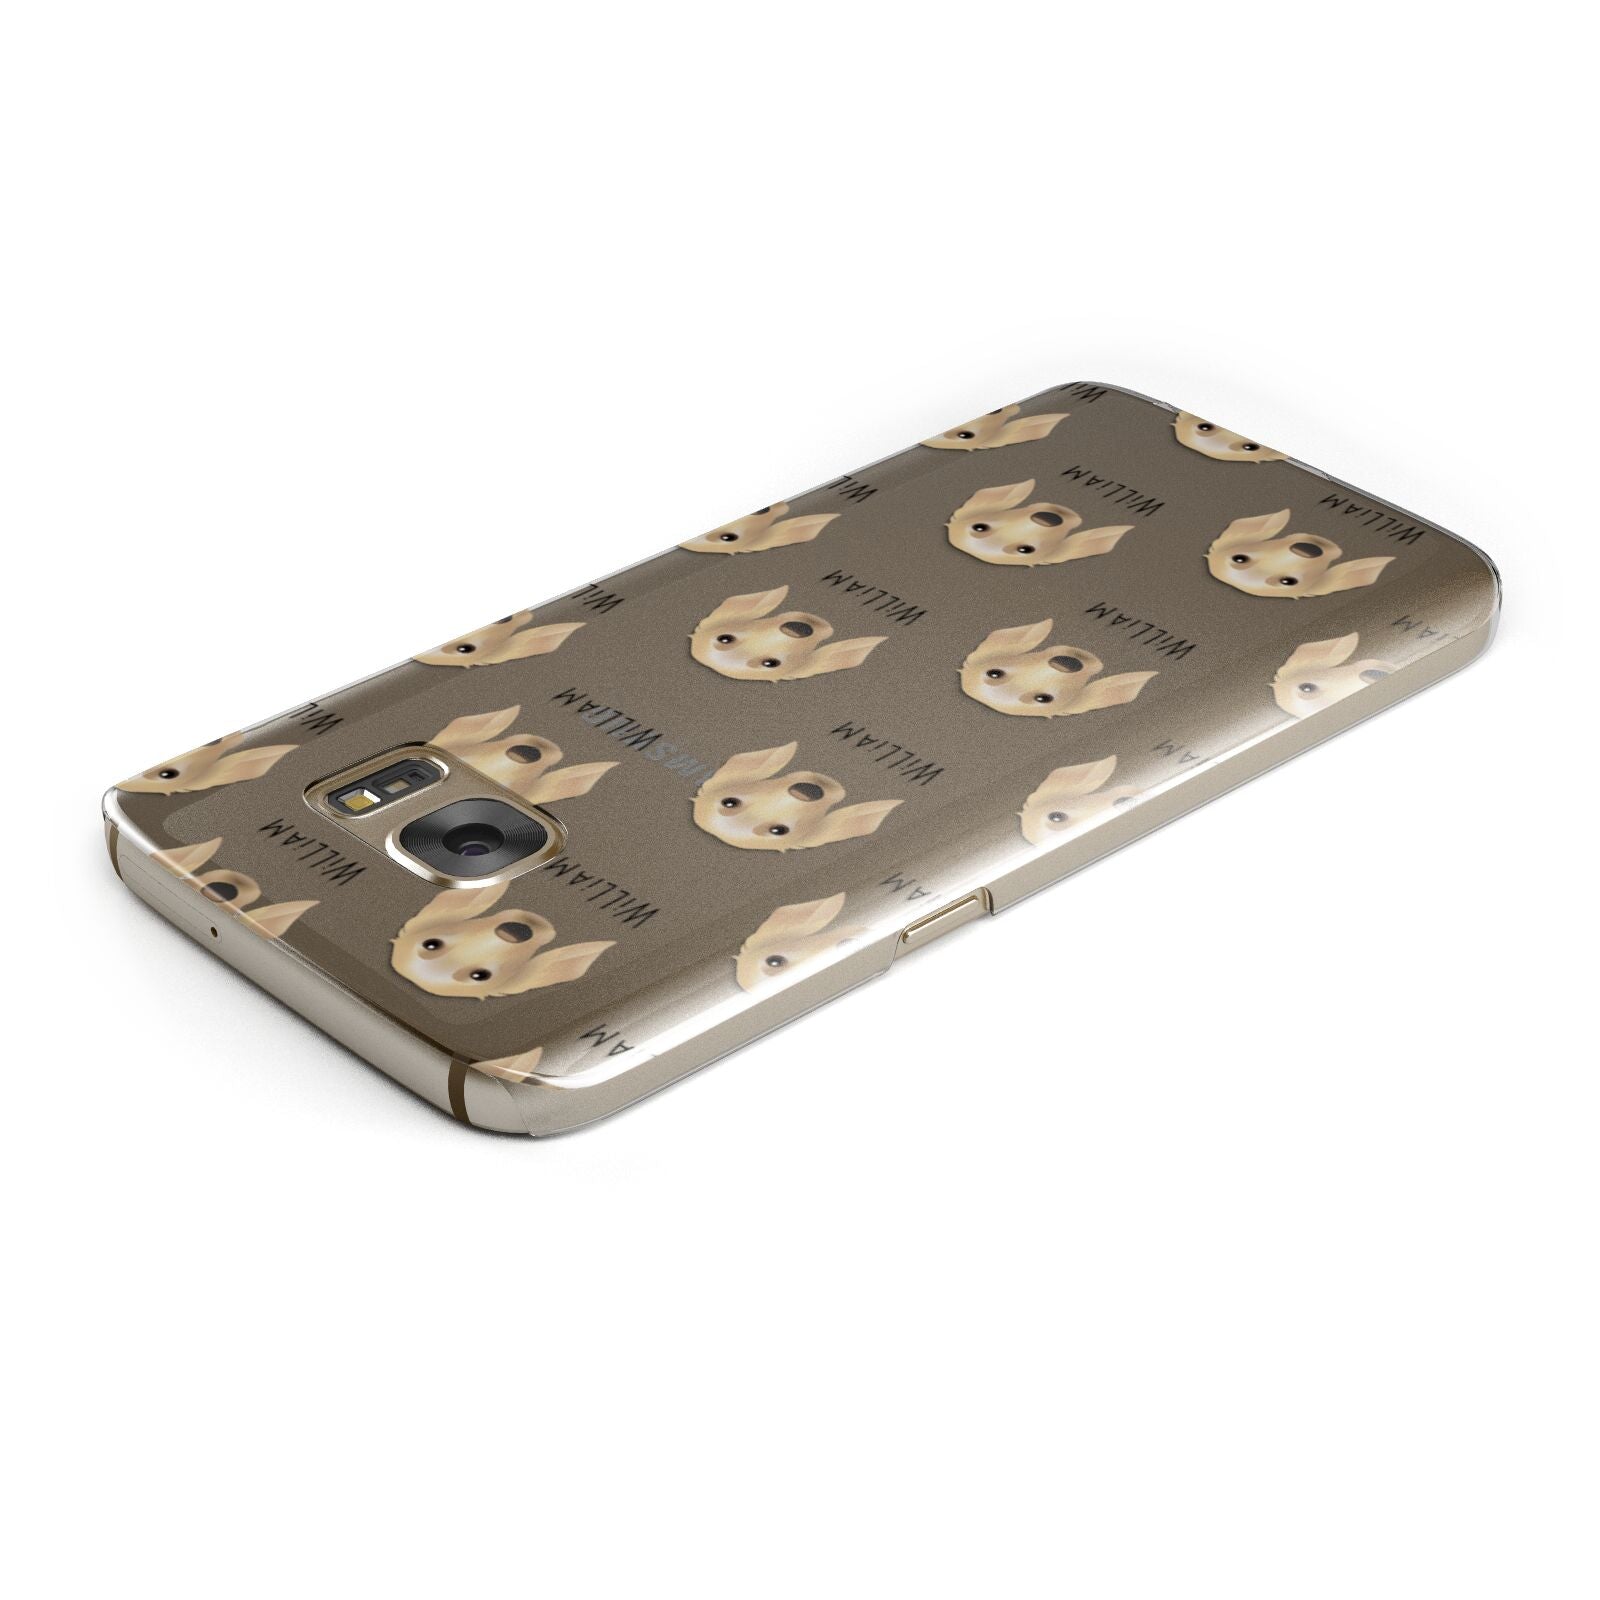 Golden Dox Icon with Name Samsung Galaxy Case Top Cutout